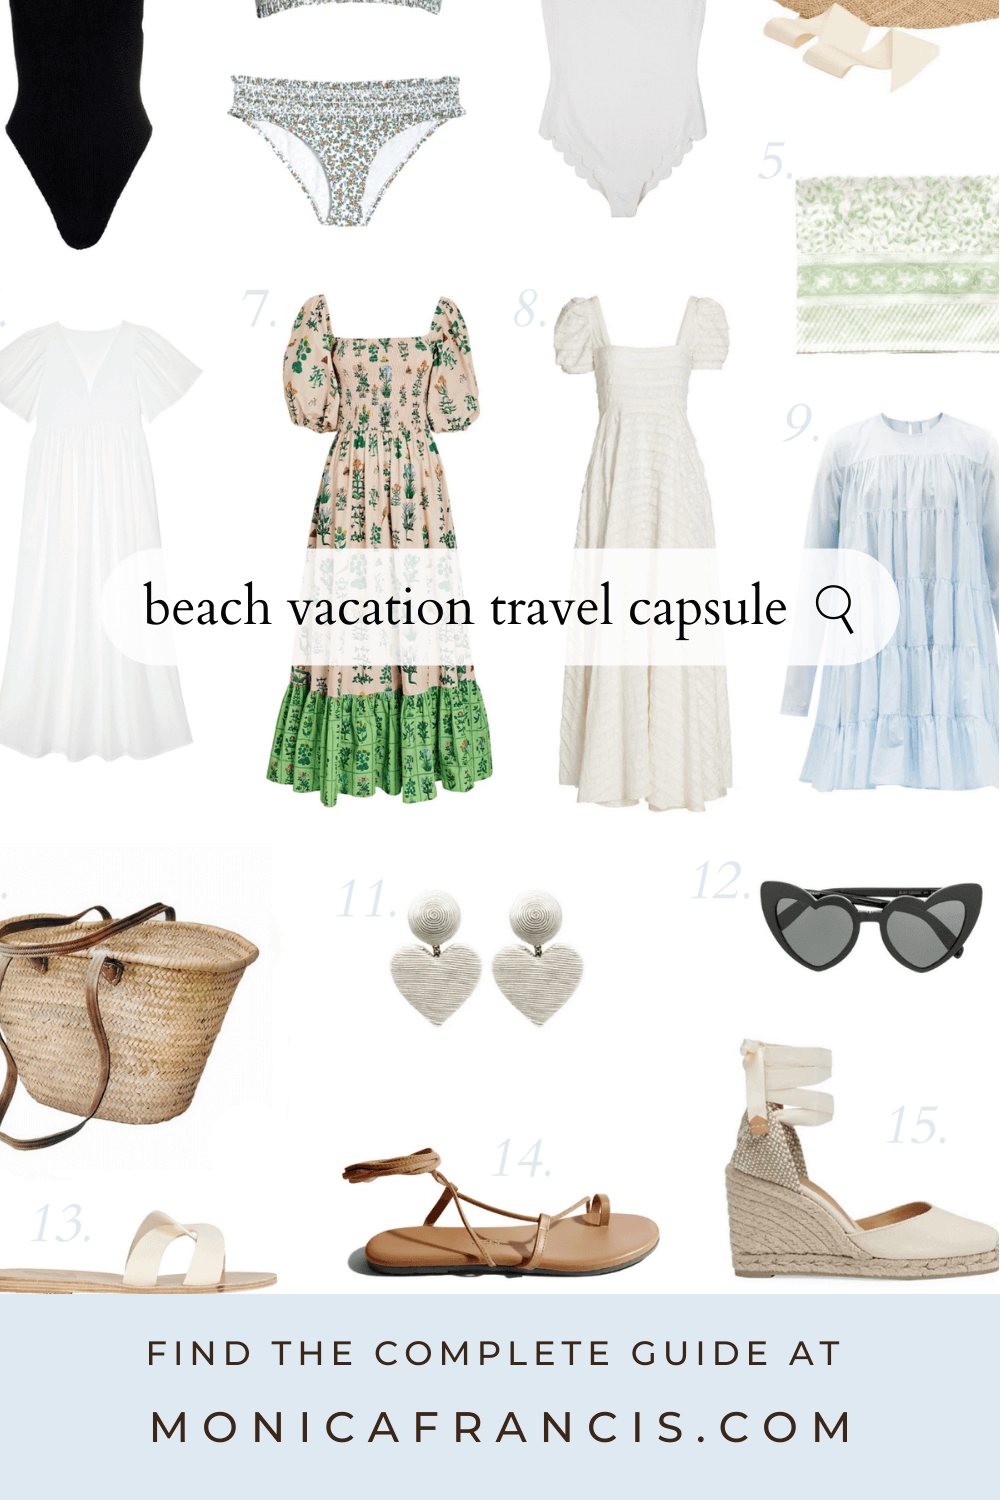 A summer beach vacation is the perfect trip to build your first travel capsule! Pack light (and make your trip even more relaxing) with mix-and-match outfits that make up your beach vacation capsule wardrobe.